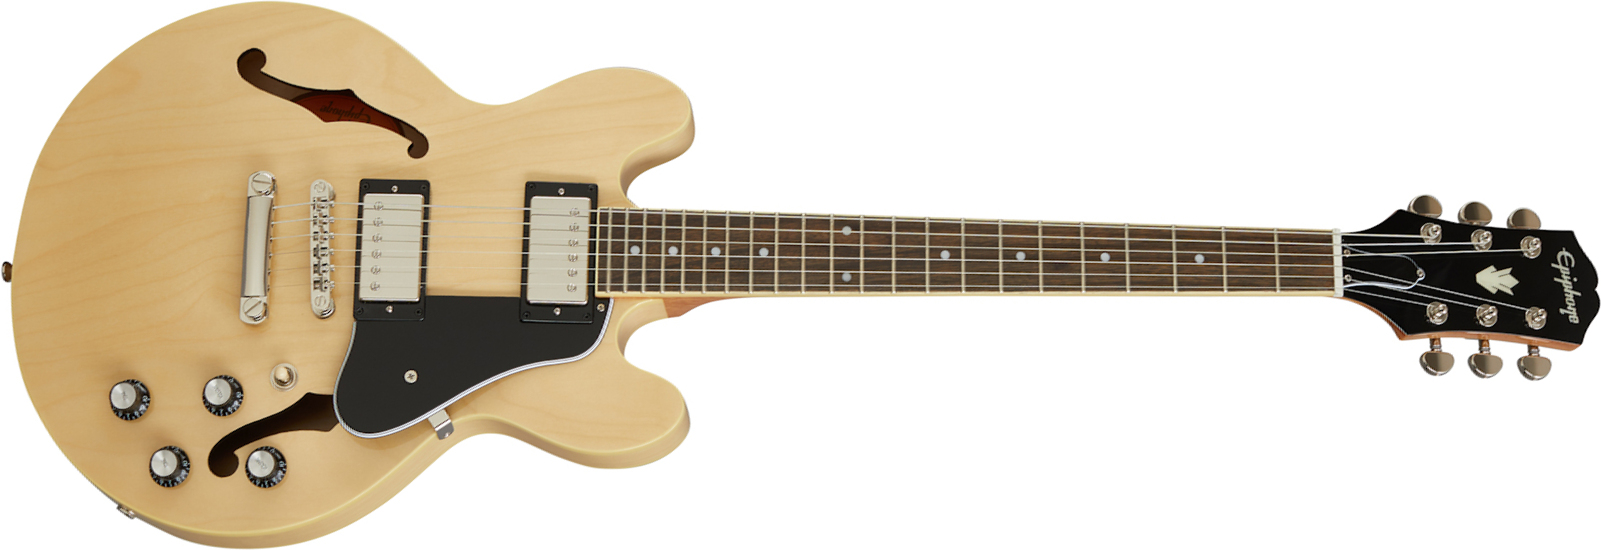 Epiphone Es-339 Inspired By Gibson 2020 2h Ht Rw - Natural - Semi-Hollow E-Gitarre - Main picture